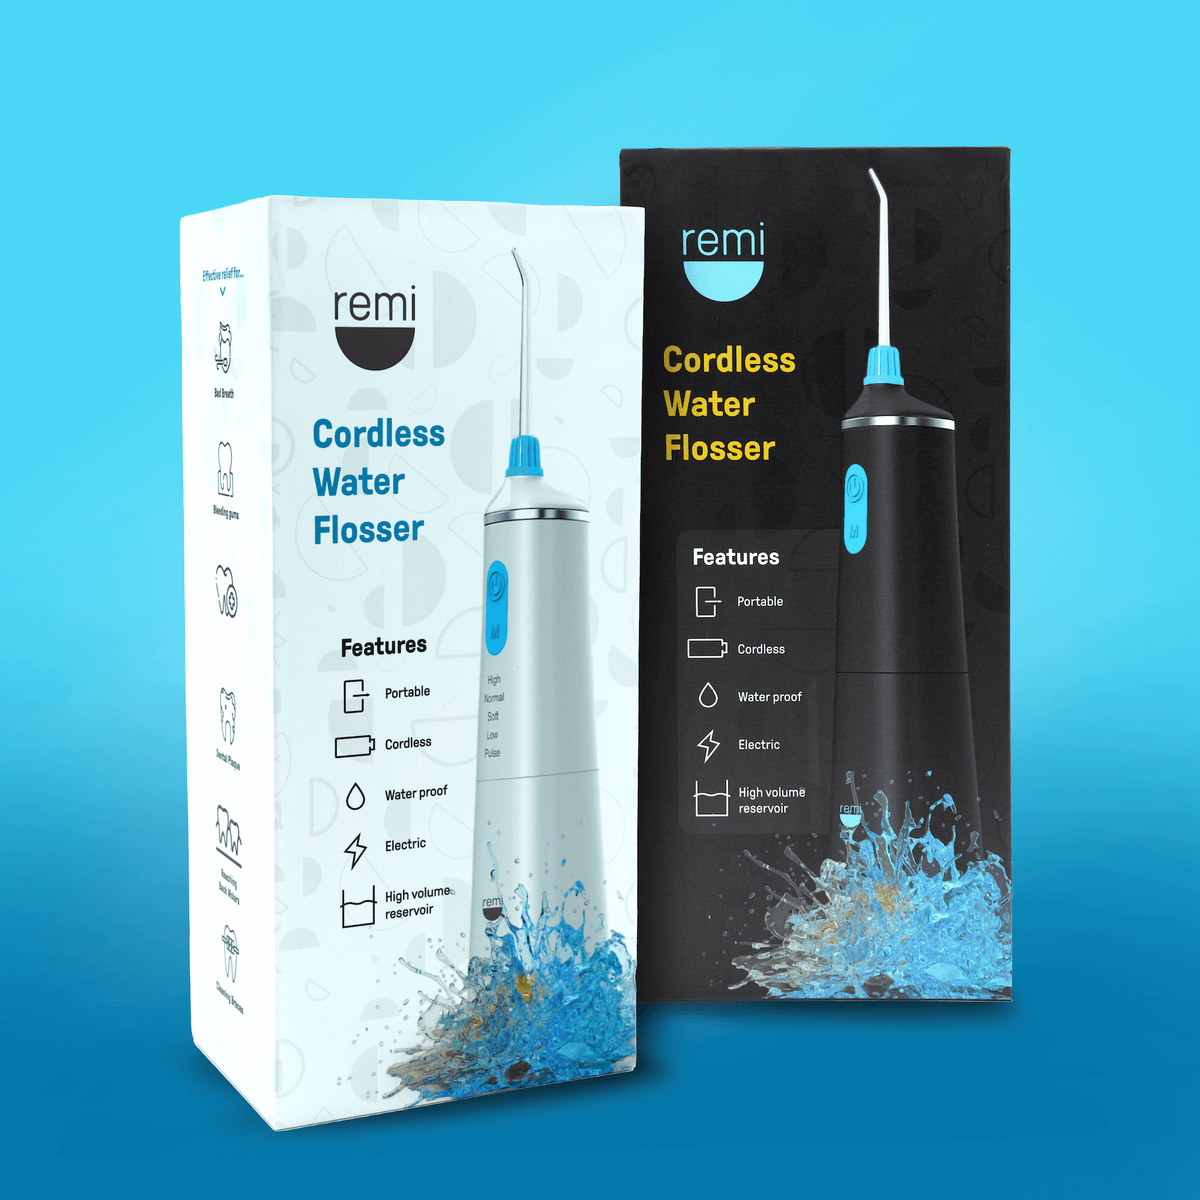 Cordless Water Flosser presentation with features highlighted on packaging, including gum disease prevention and plaque removal.